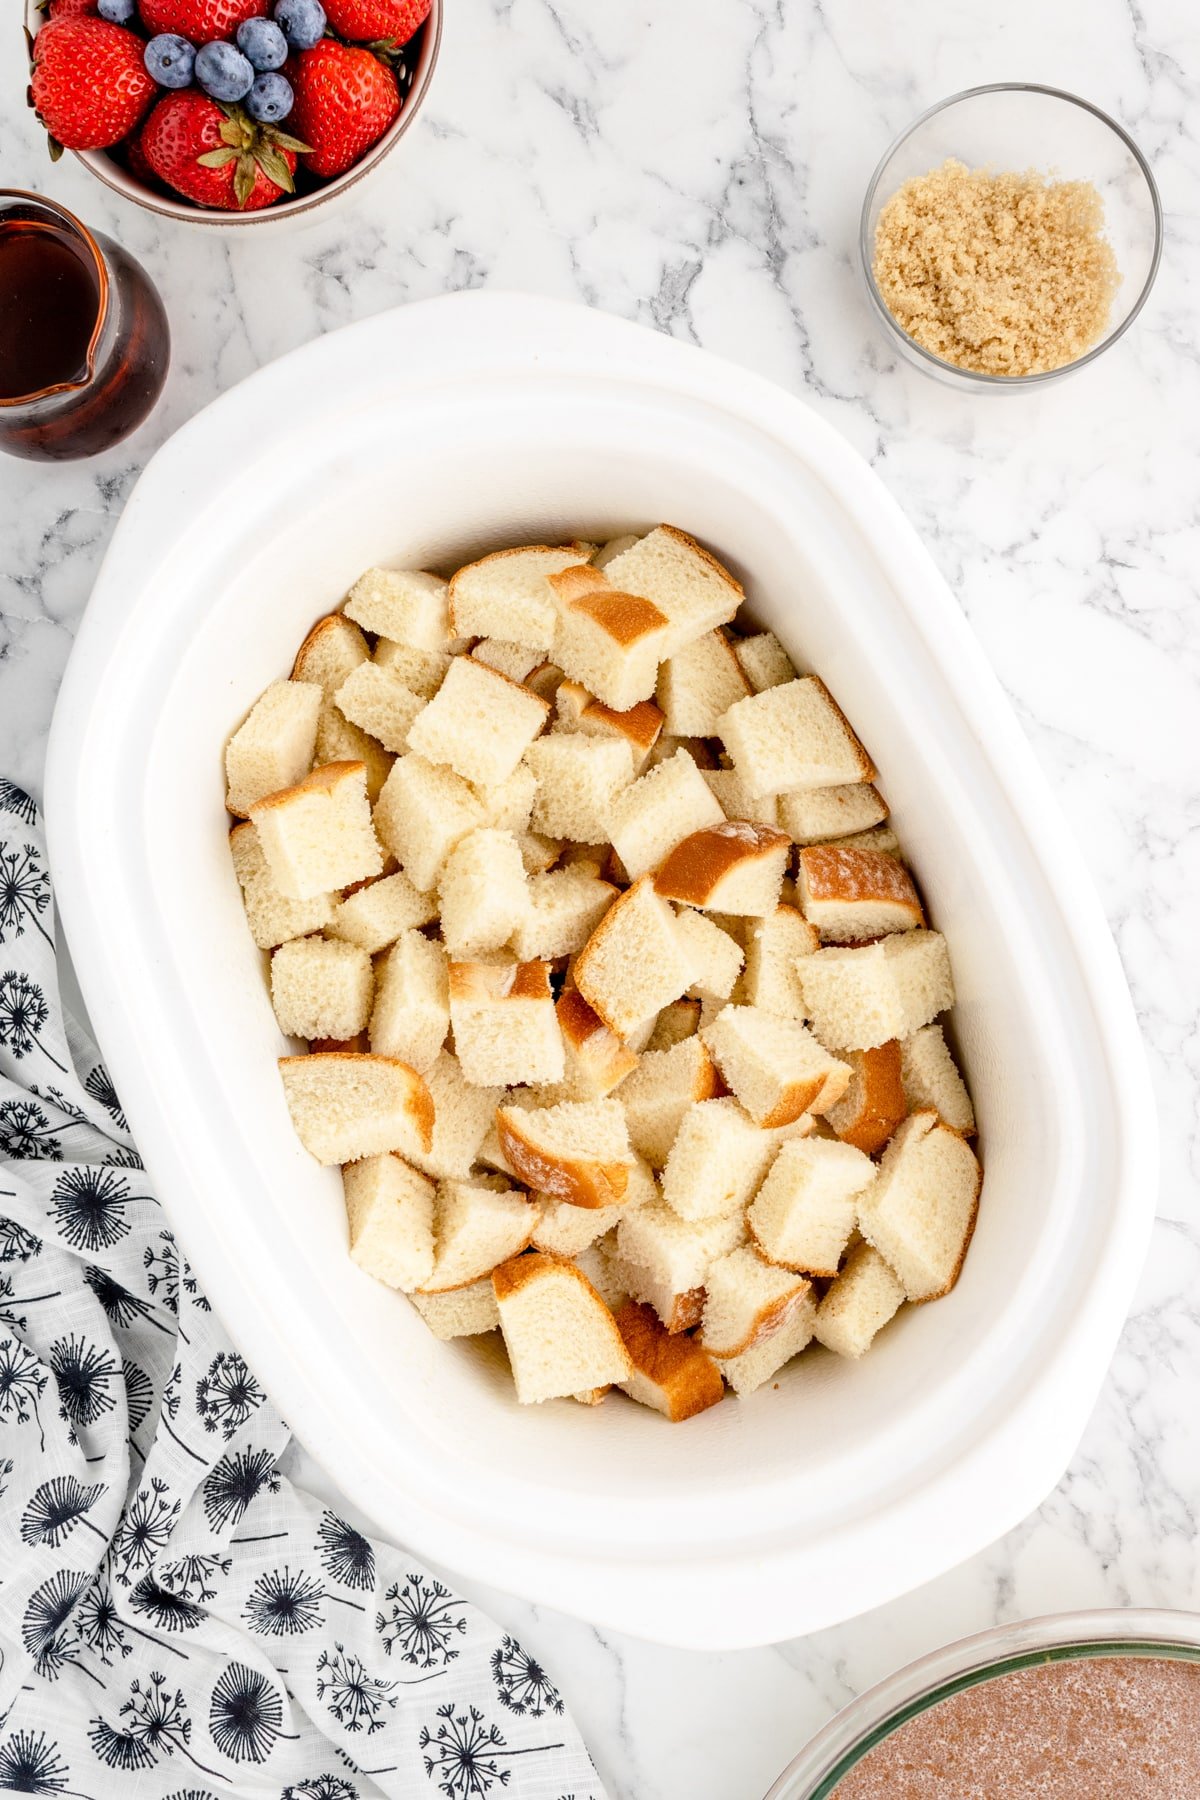 A slow cooker filled with bread cubes in it.